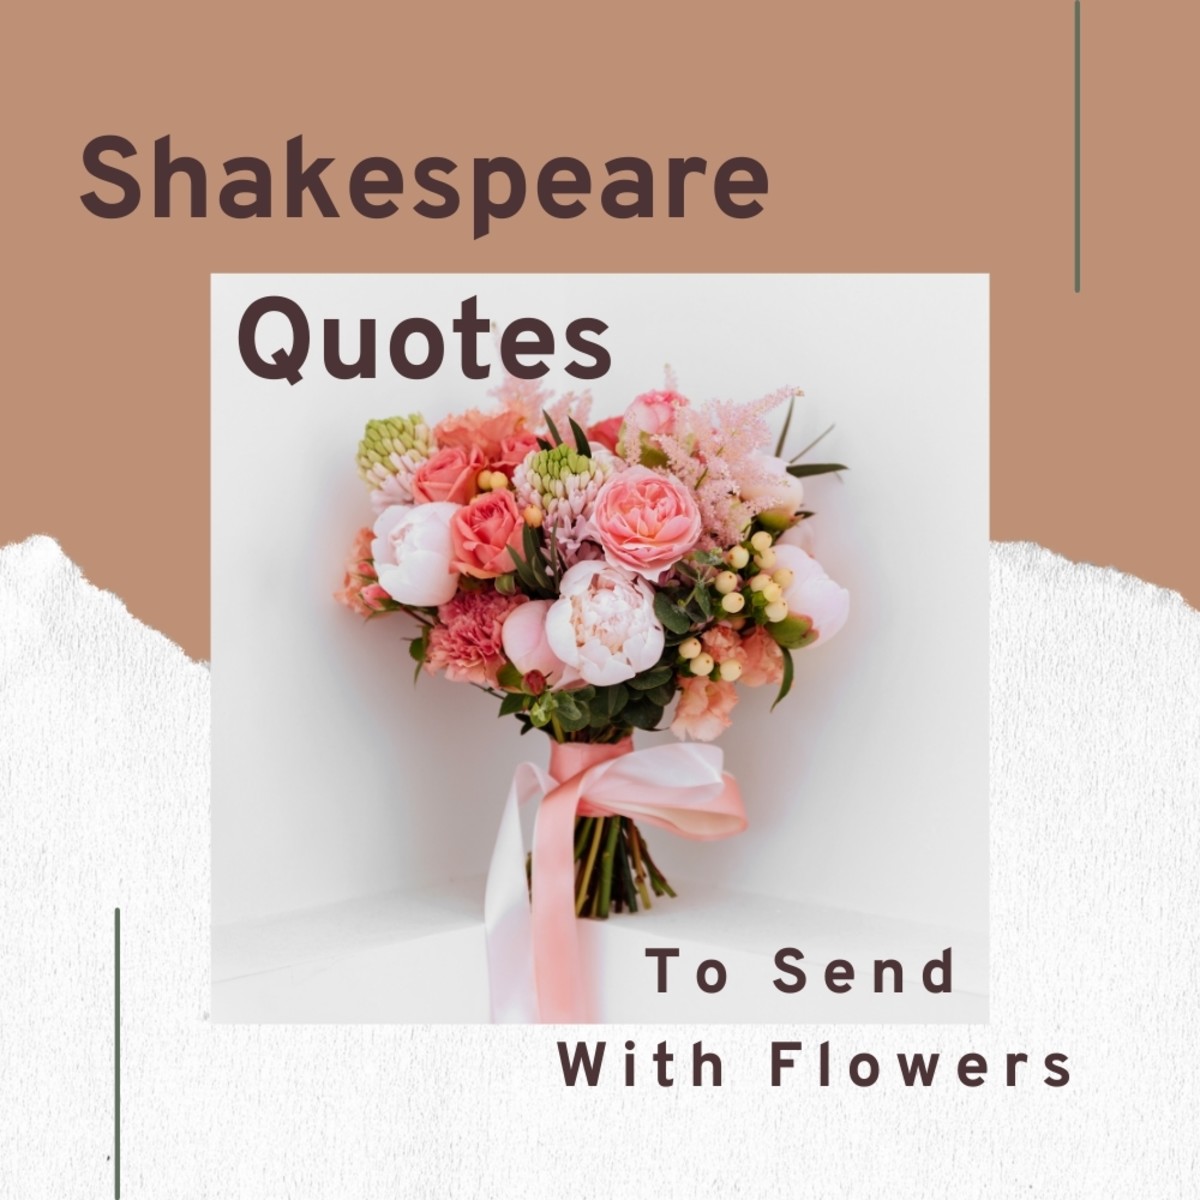 Shakespeare quotes add class and depth to your flower arrangements.